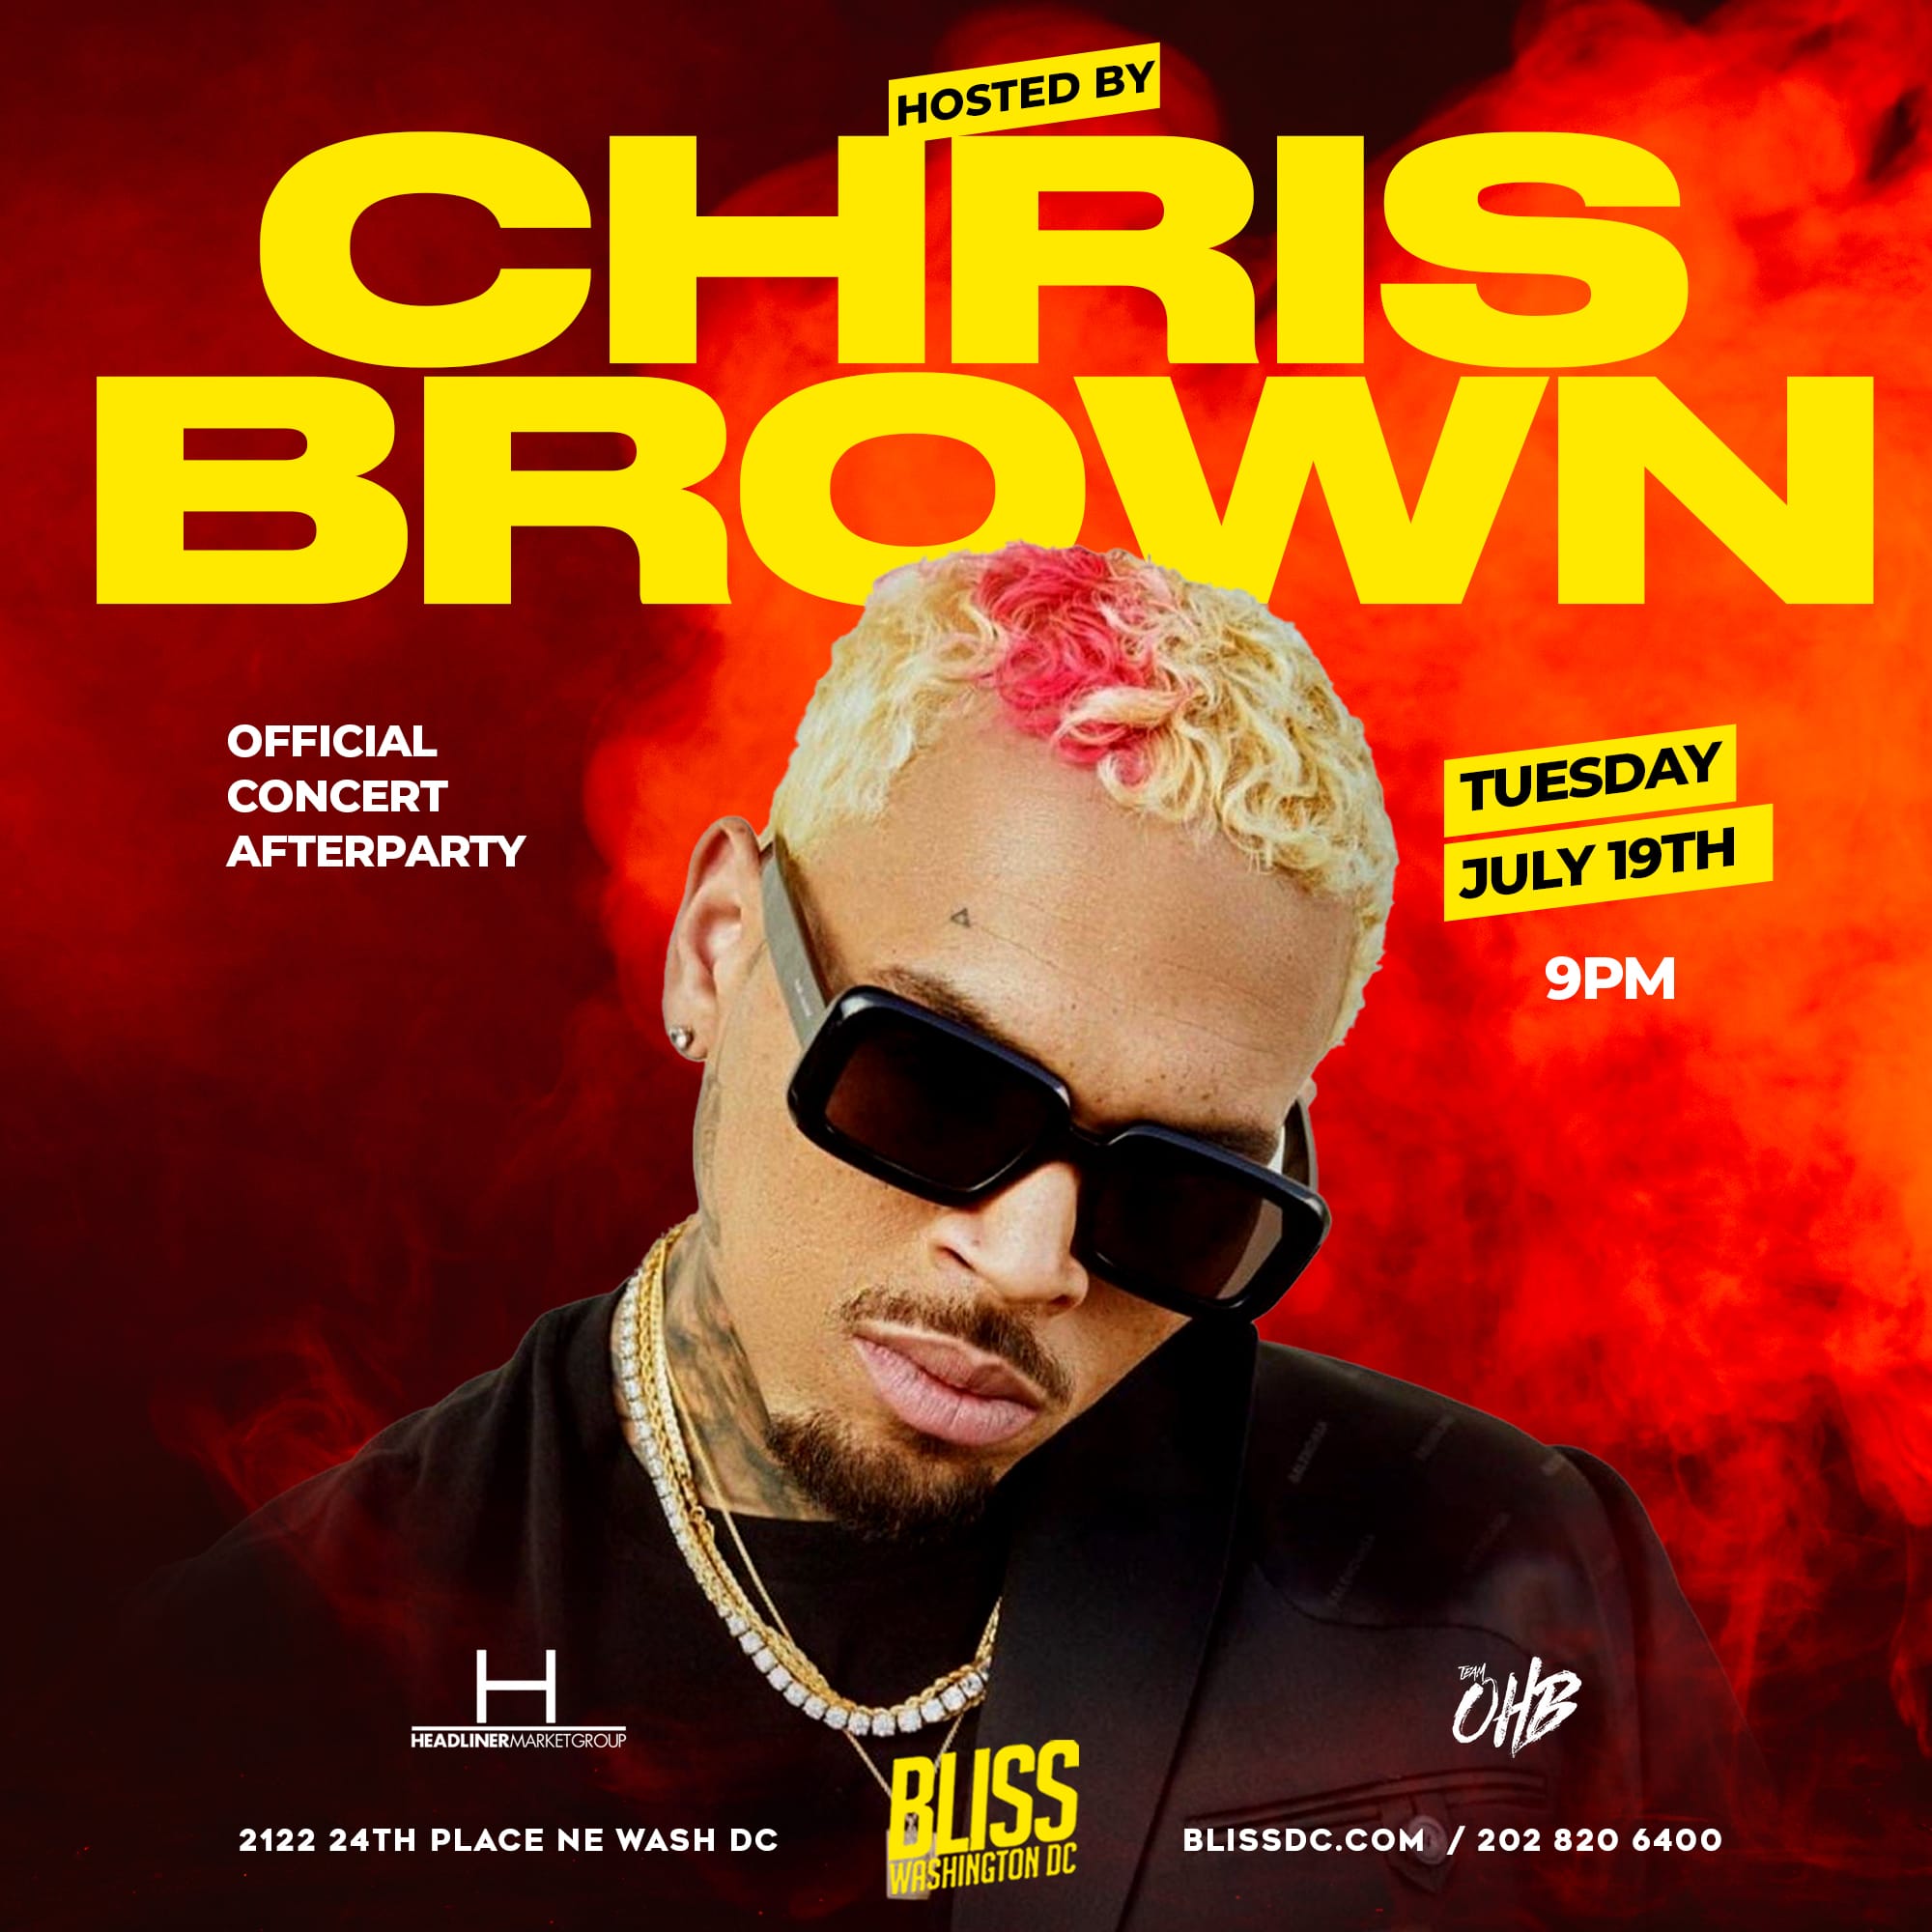 Buy Tickets to CHRIS BROWN AT BLISS in Washington on Jul 19, 2022